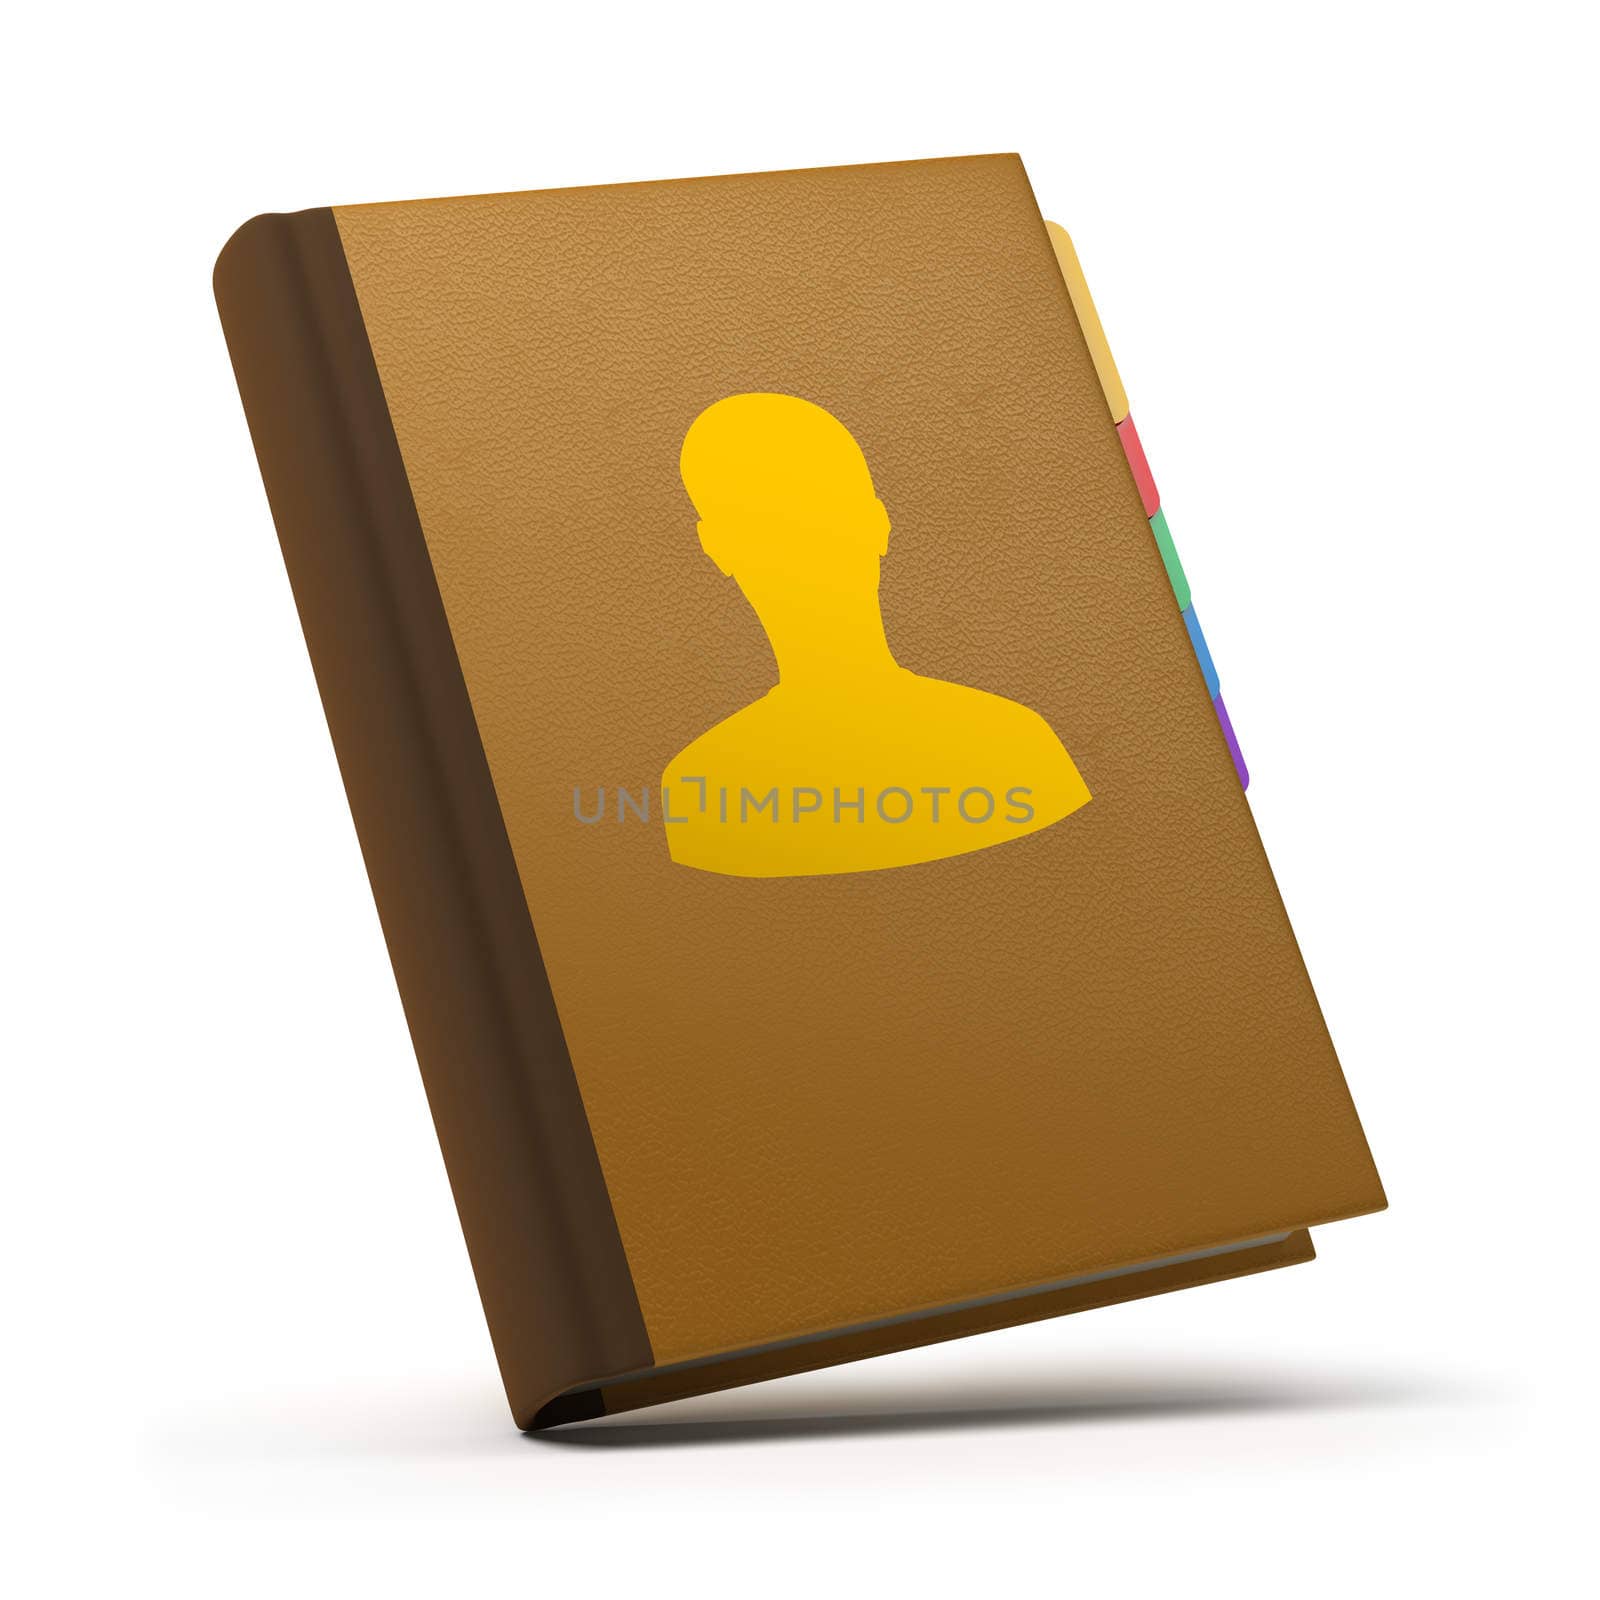 Leather book of contacts. 3d image. Isolated white background.